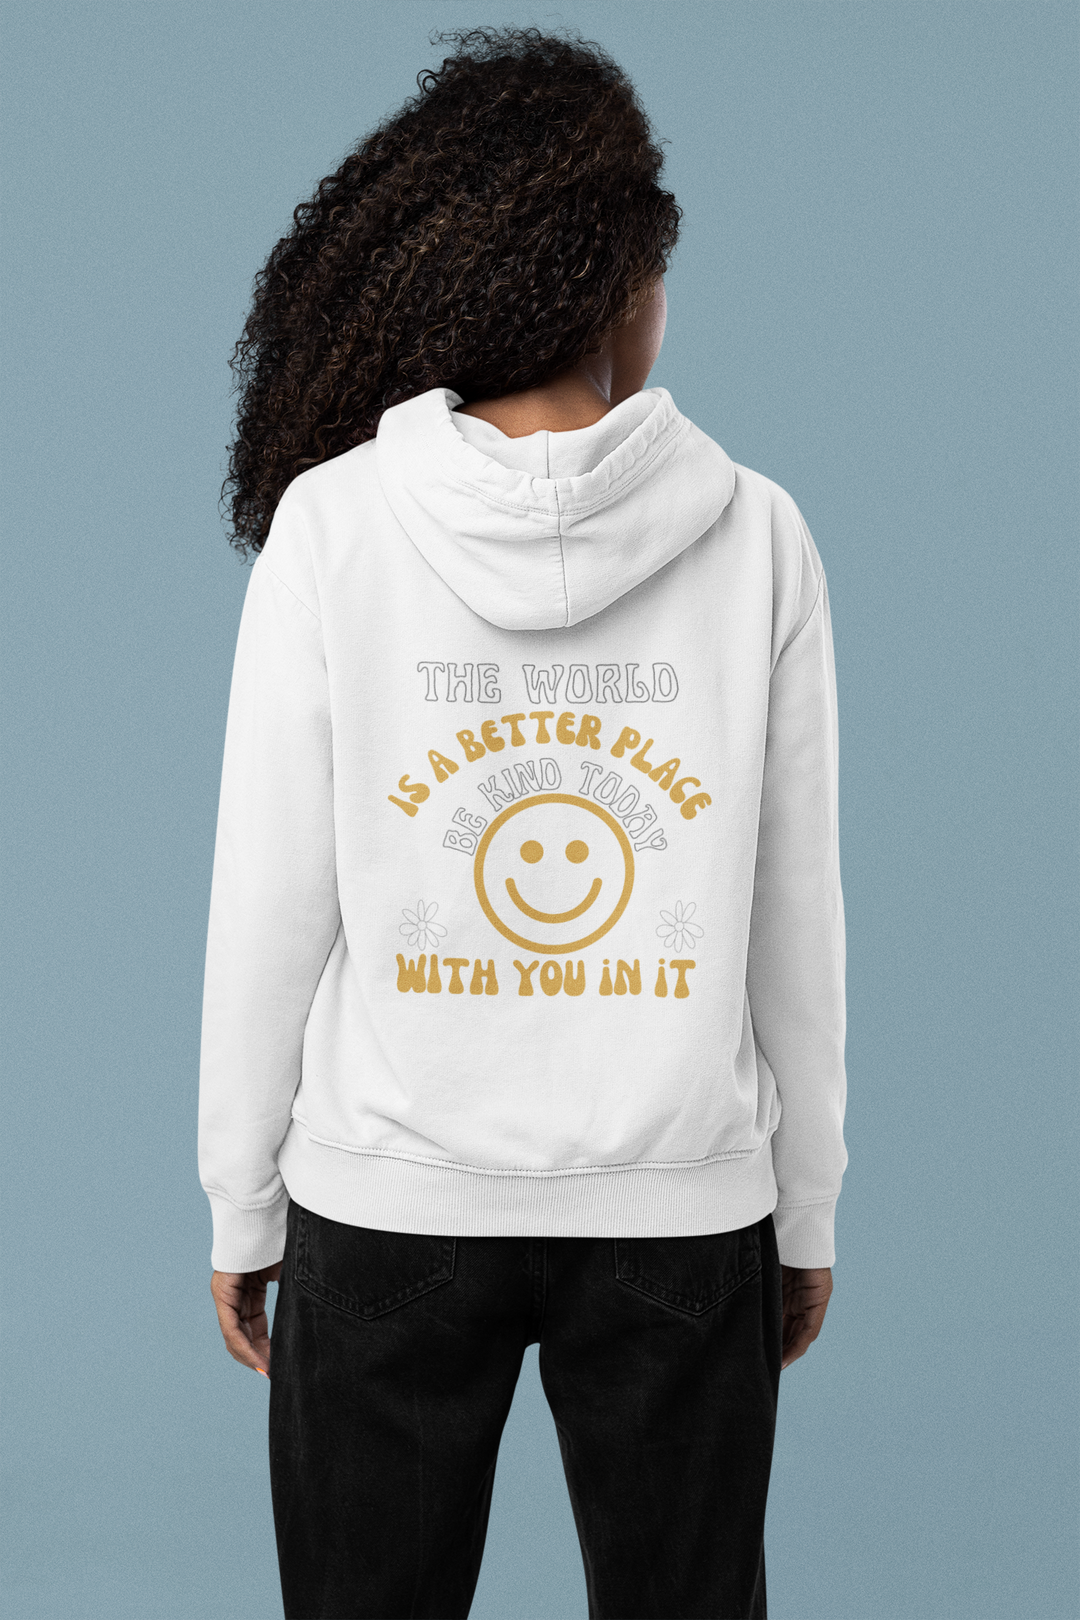 Unisex Be Kind Today Hoodie: White hoodie with smiley face graphic, kangaroo pocket, and drawstring hood. Cotton-polyester blend, no side seams, classic fit. Ideal for warmth and comfort.